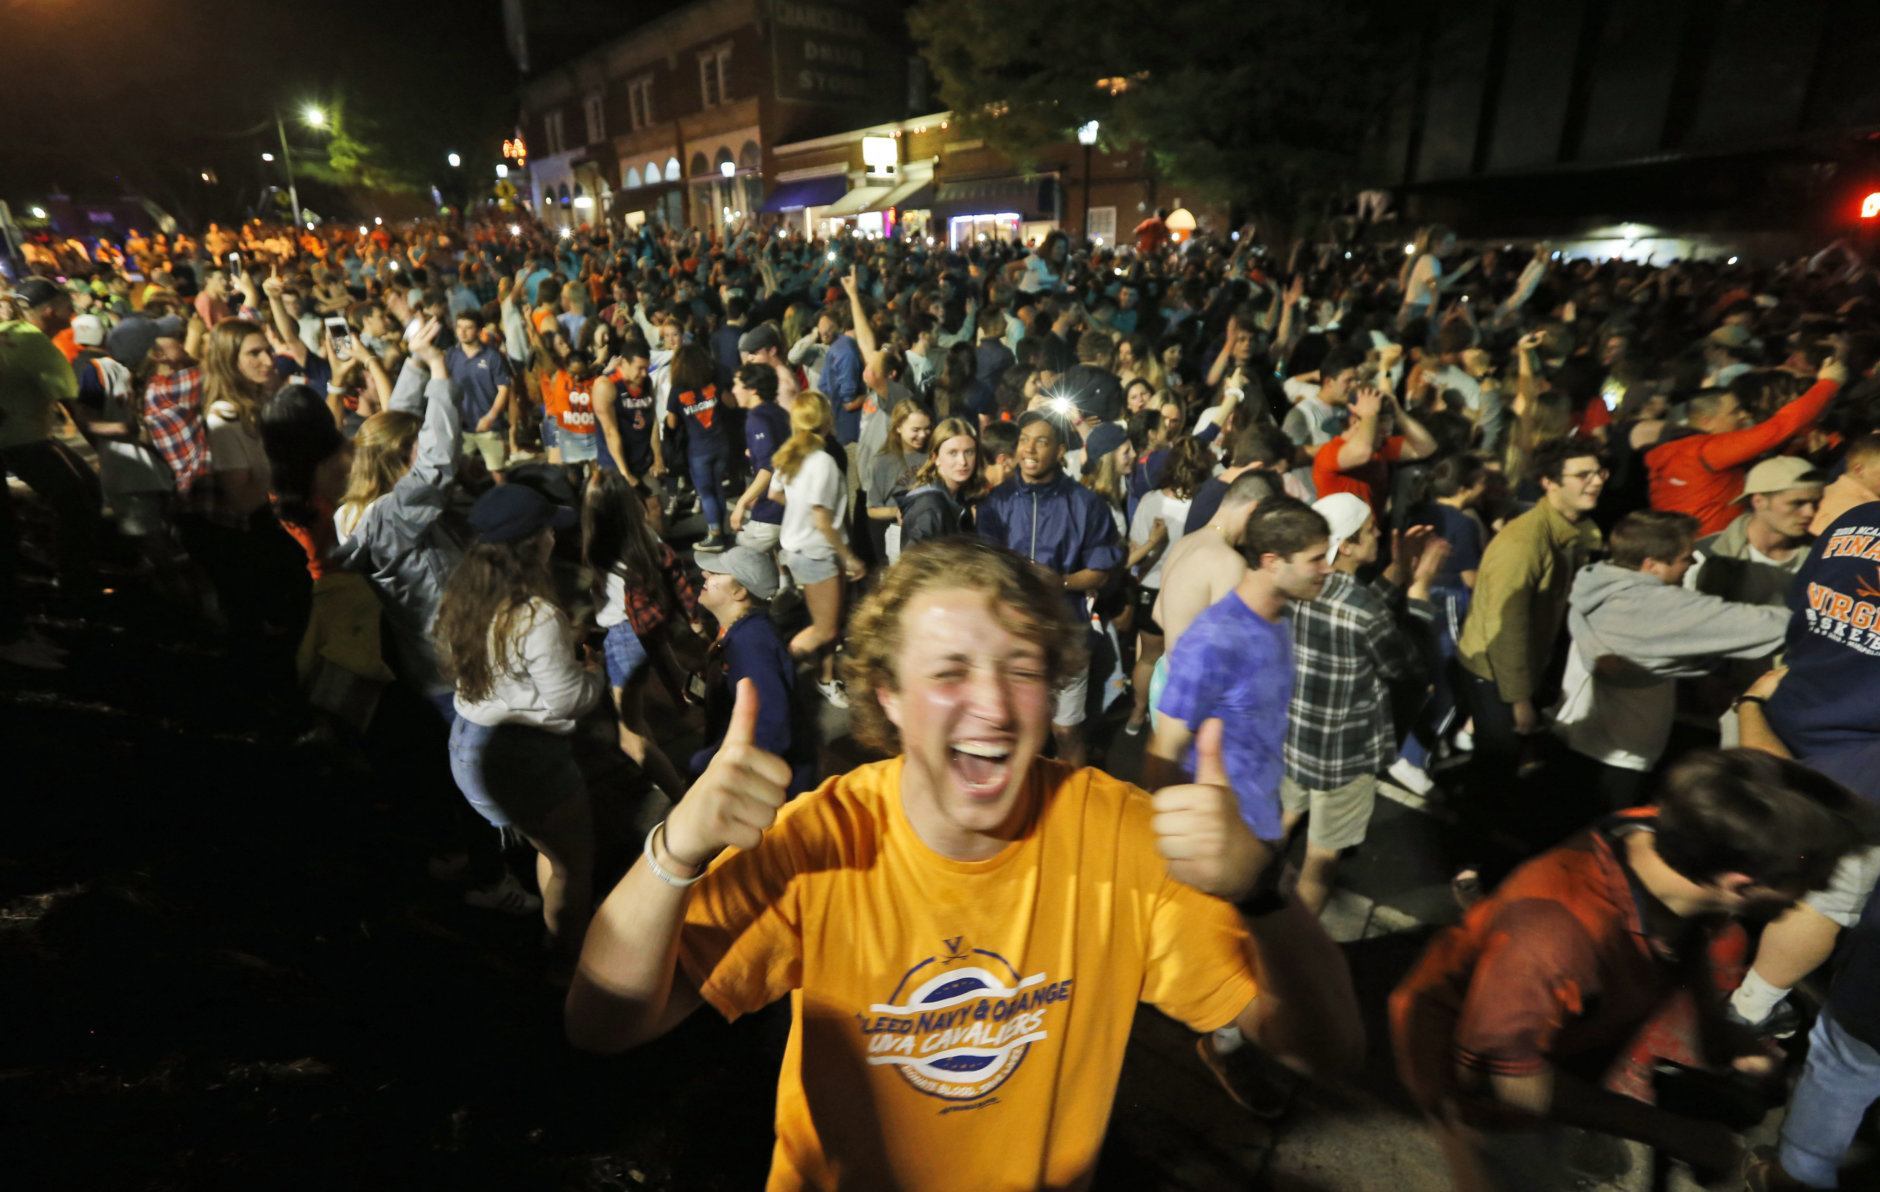 Virginia fans celebrate their team's win in the championship of the Final Four NCAA college basketball tournament against Texas Tech, at an intersection near the school in Richmond, Va., Monday, April 8, 2019. (AP Photo/Steve Helber)